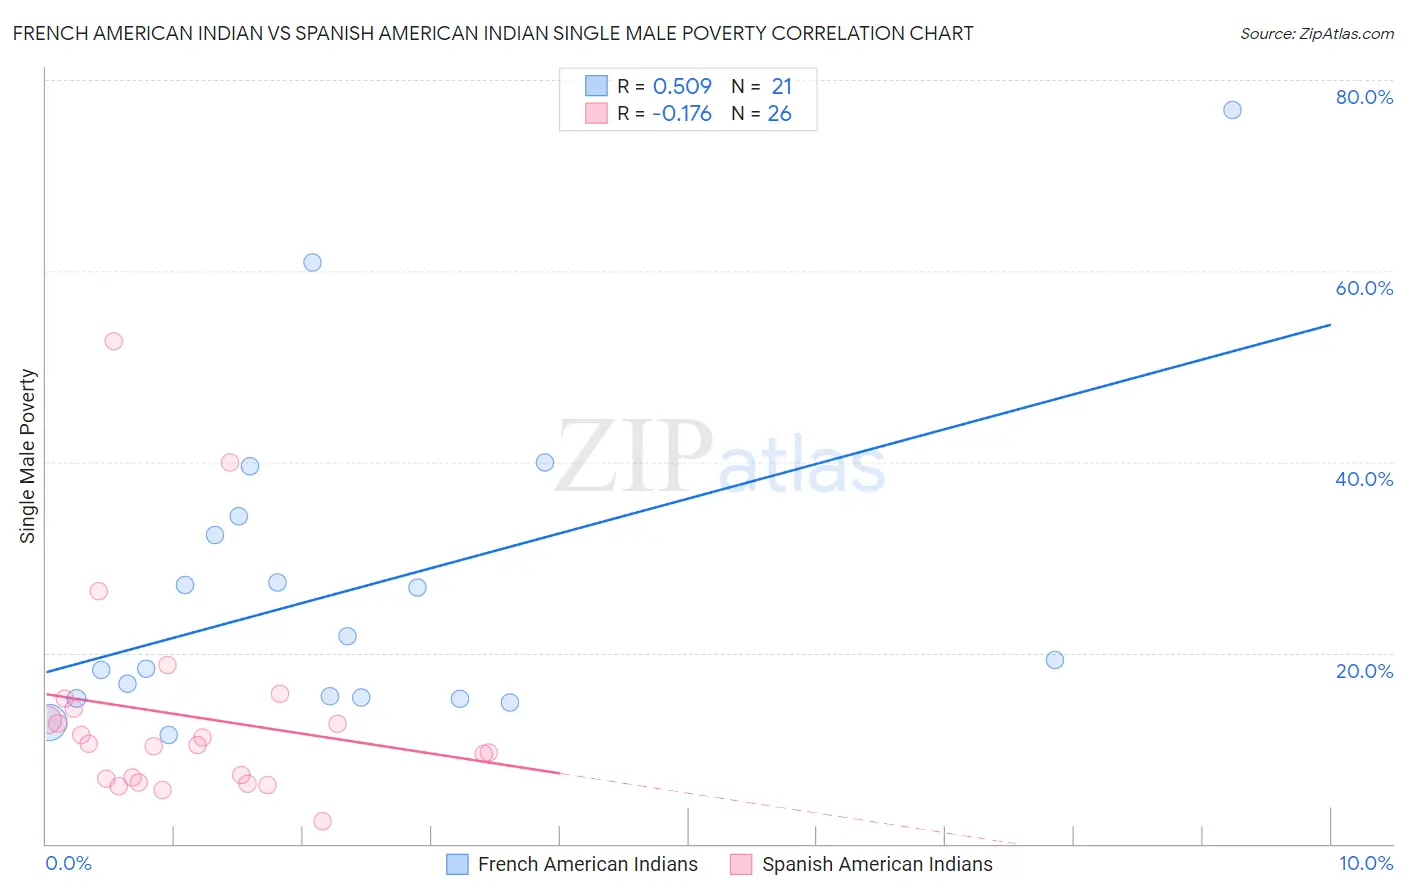 French American Indian vs Spanish American Indian Single Male Poverty